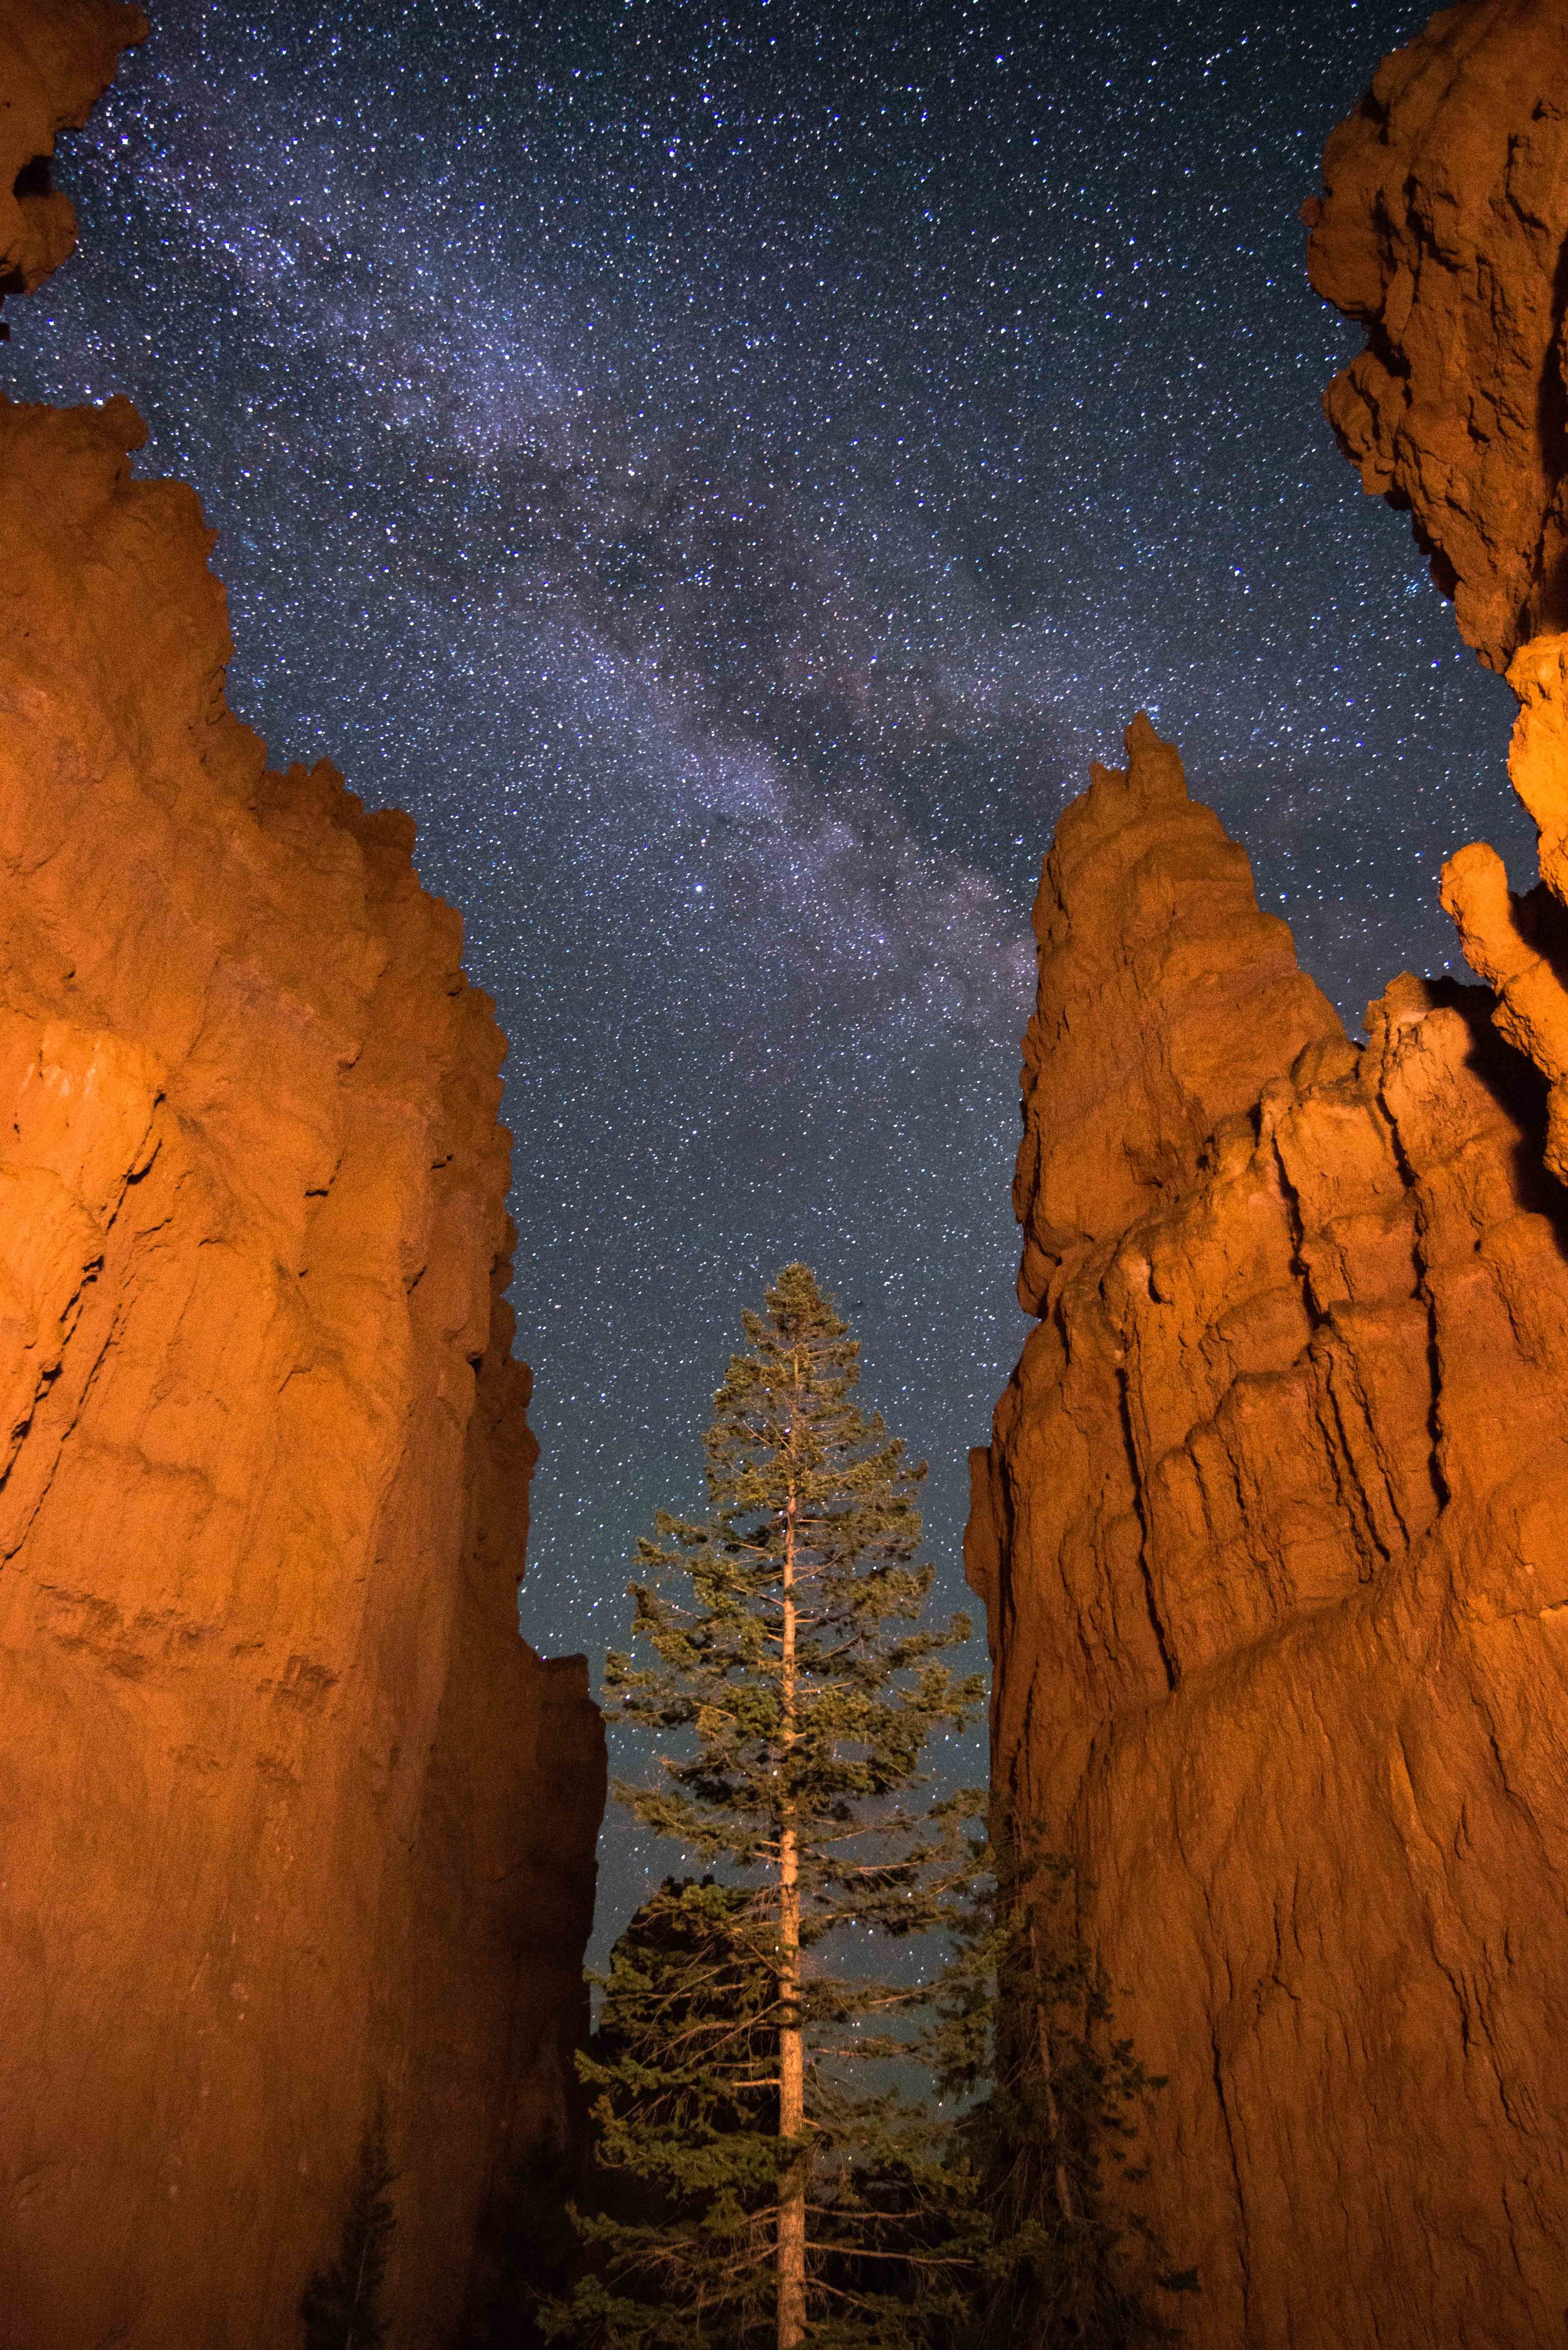 Hoodoos in Bryce Canyon with Painted Light, Tree, and Milky Way